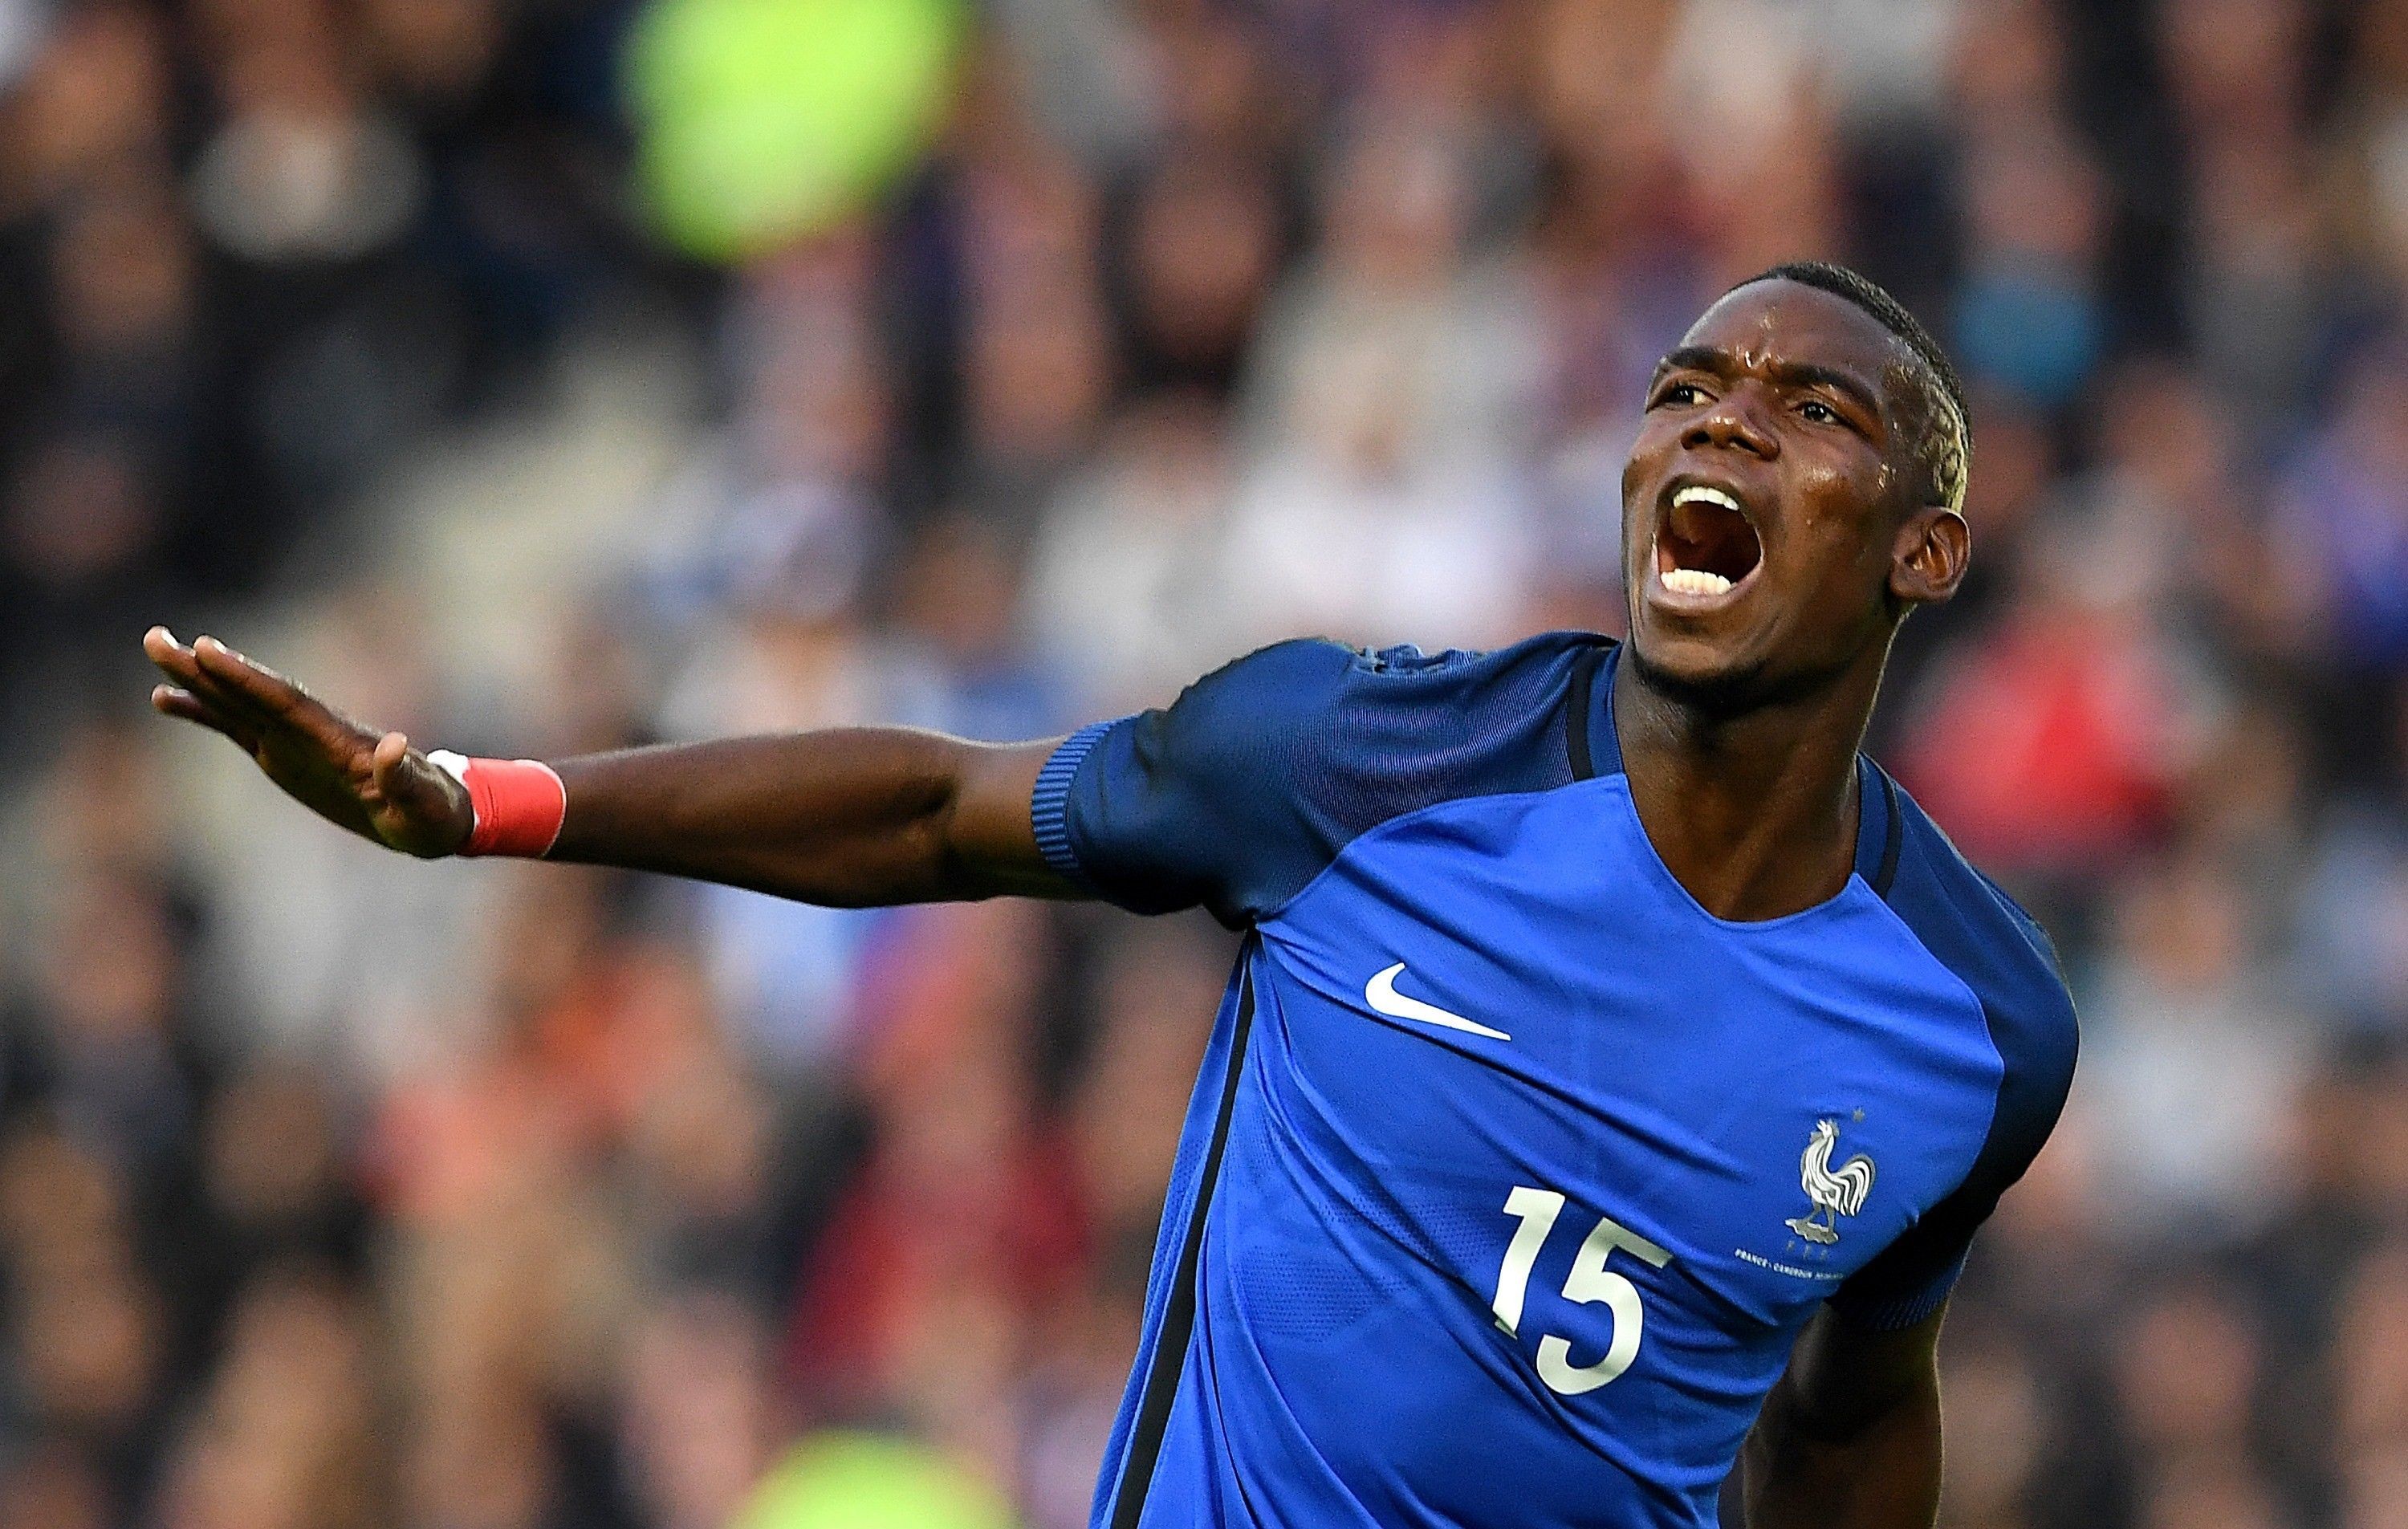 French Footballer Paul Pogba Fifa World Cup 2018 Match - French Football Players Pogba - HD Wallpaper 